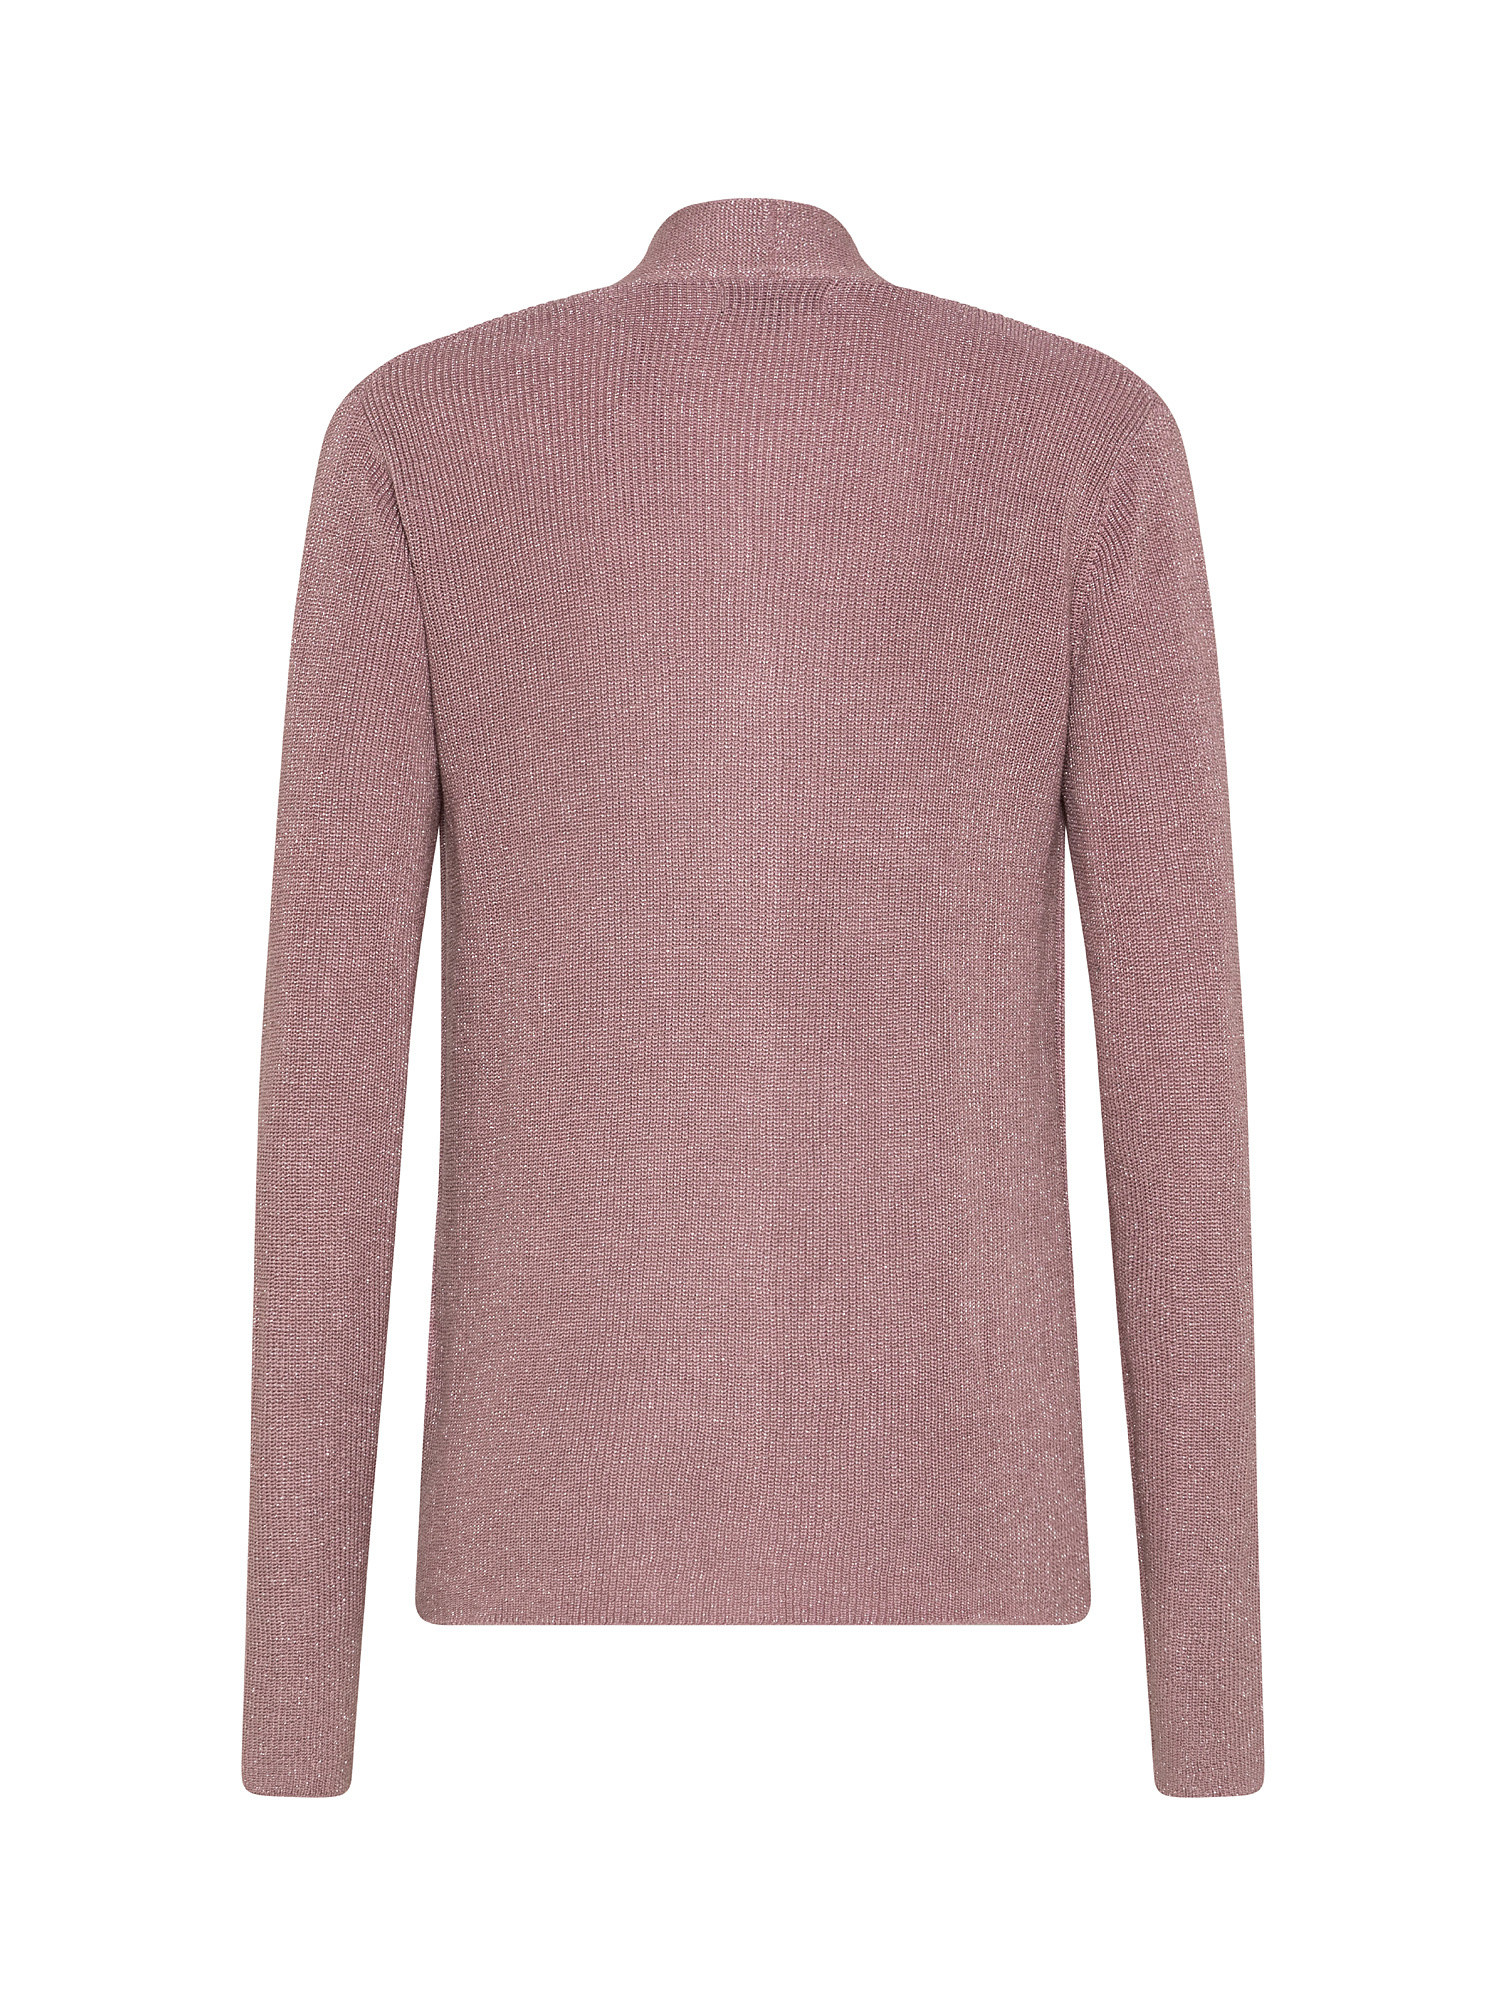 Cardigan in maglia, Rosa, large image number 1